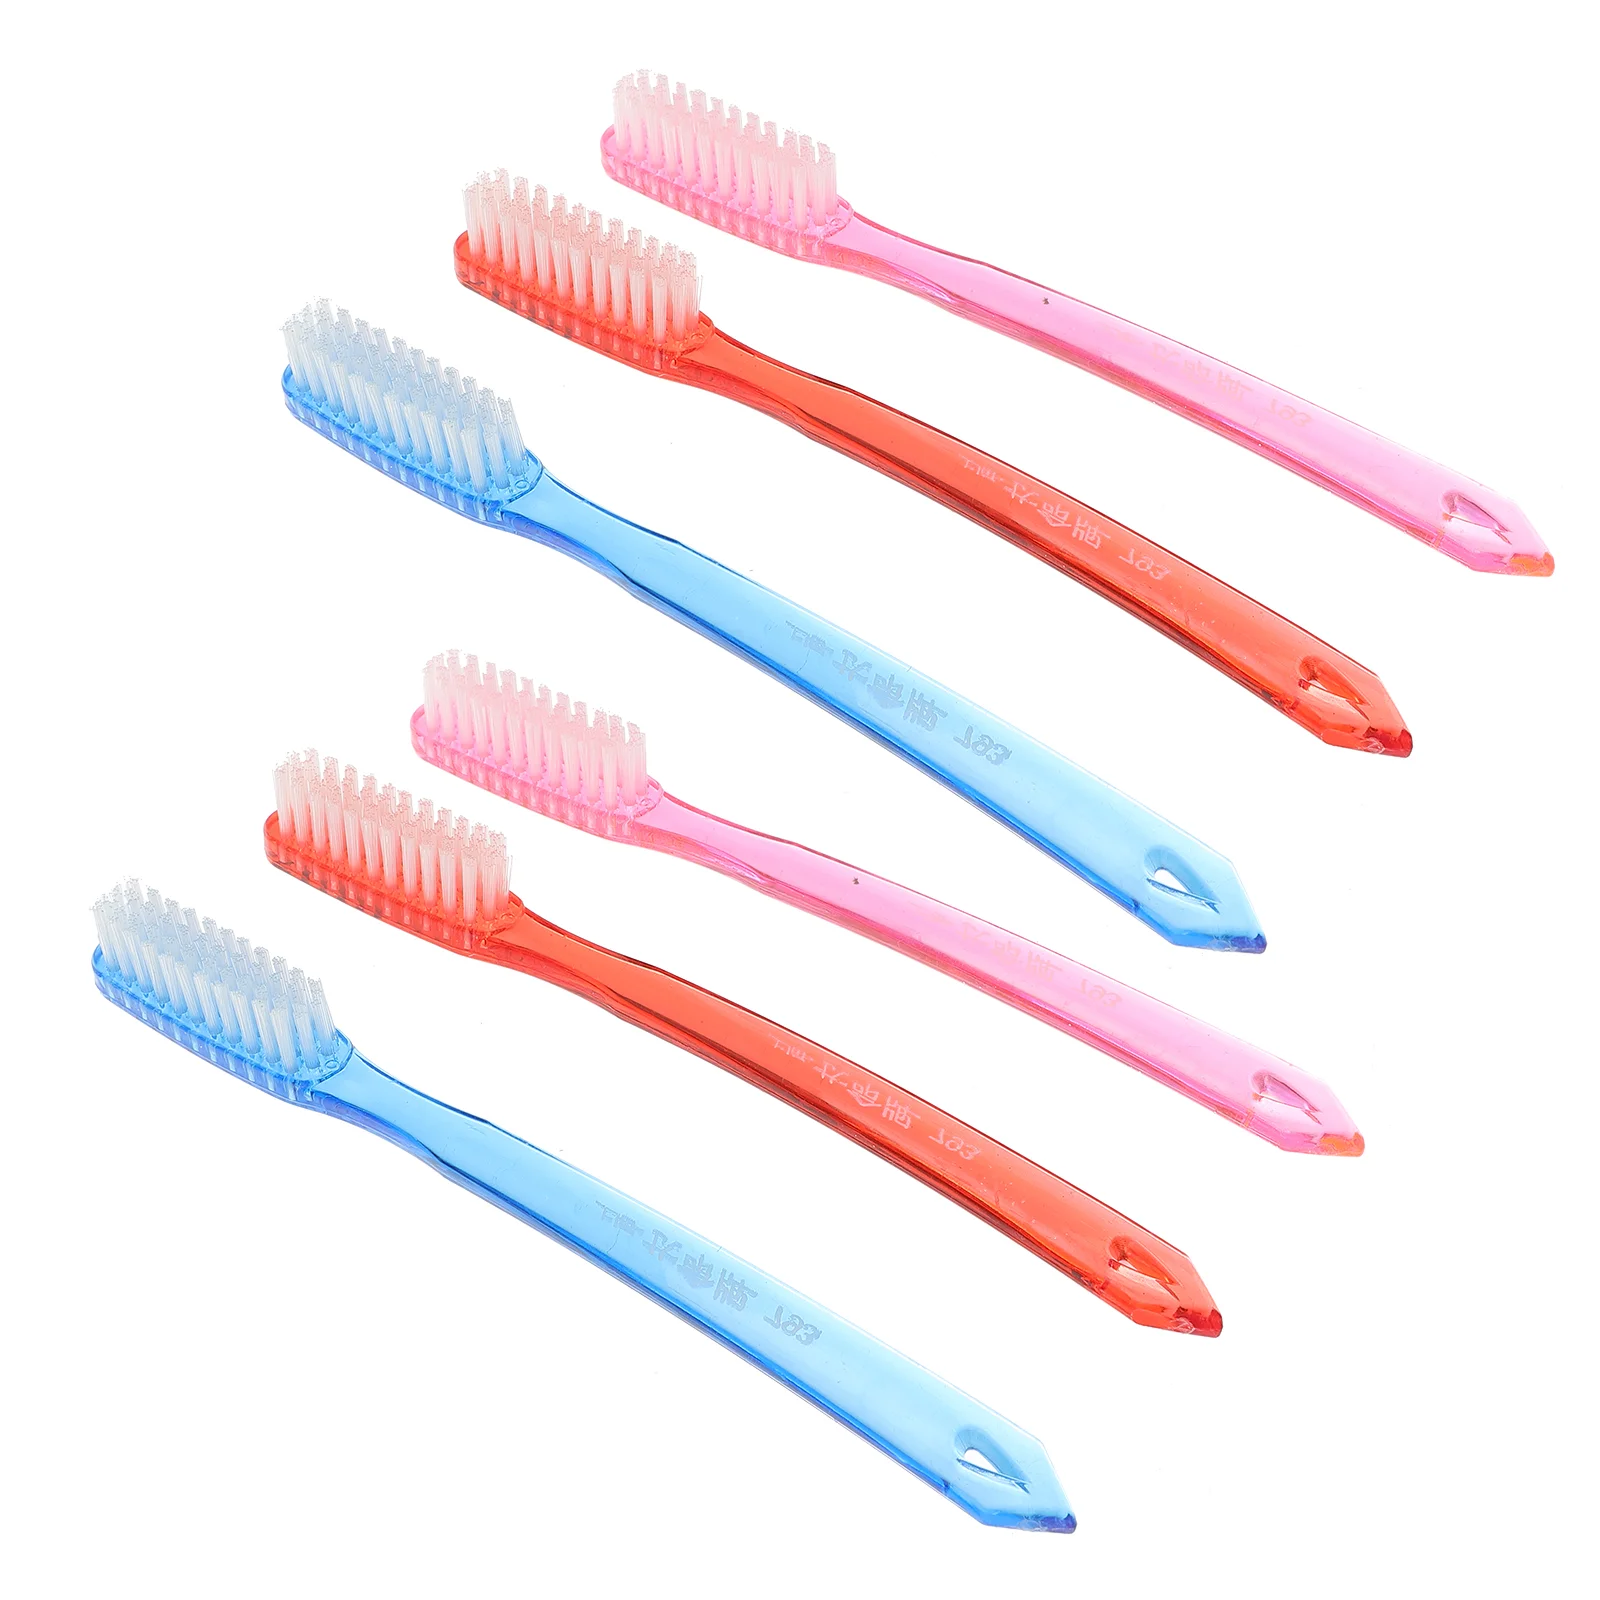 

Toothbrush Firm Hard Tooth Dental Brush Toothpicks Oral Teeth Super Cleaning Refill Cleaner Gingival Reach Extra Flosser Floss